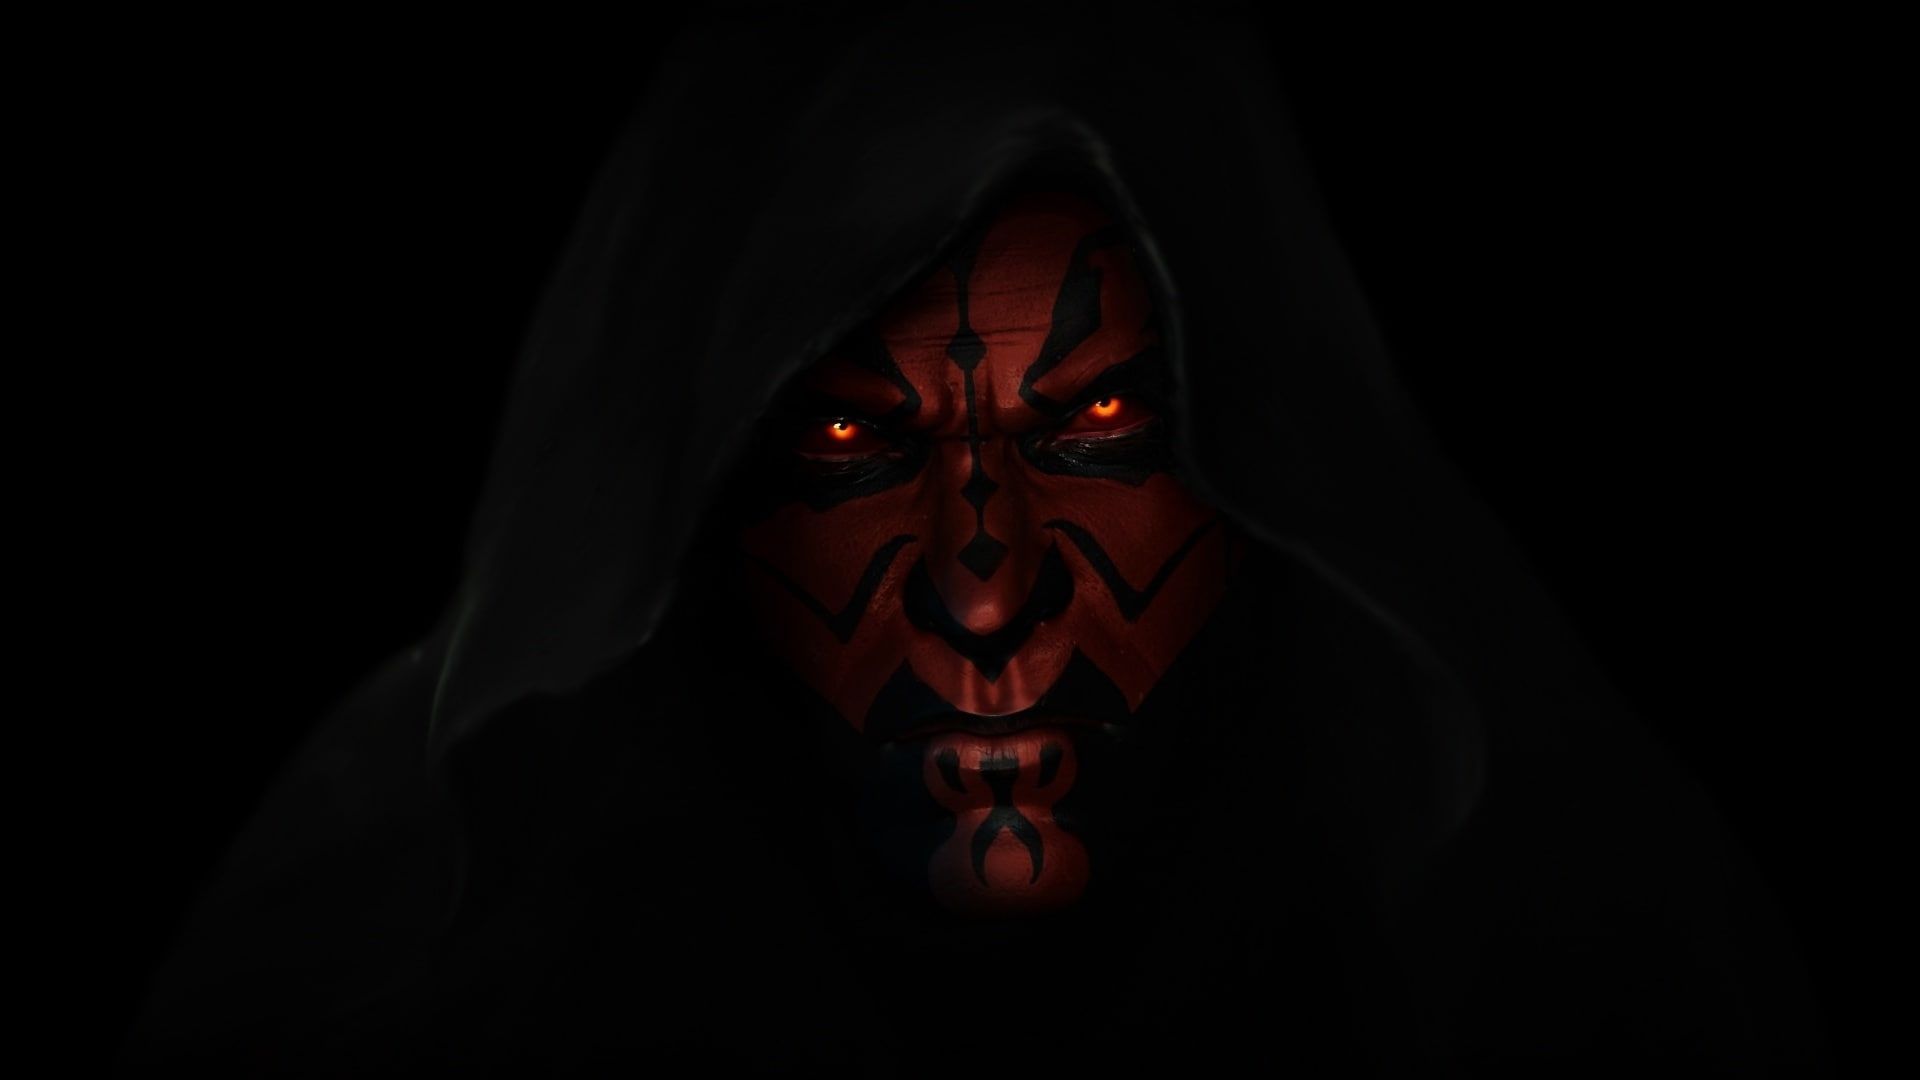 person wearing hood wallpaper Star Wars Darth Maul A Sith Lord Dark Lord of the Sith P #wallpaper #hdwallp. Hood wallpaper, Darth maul wallpaper, Darth maul